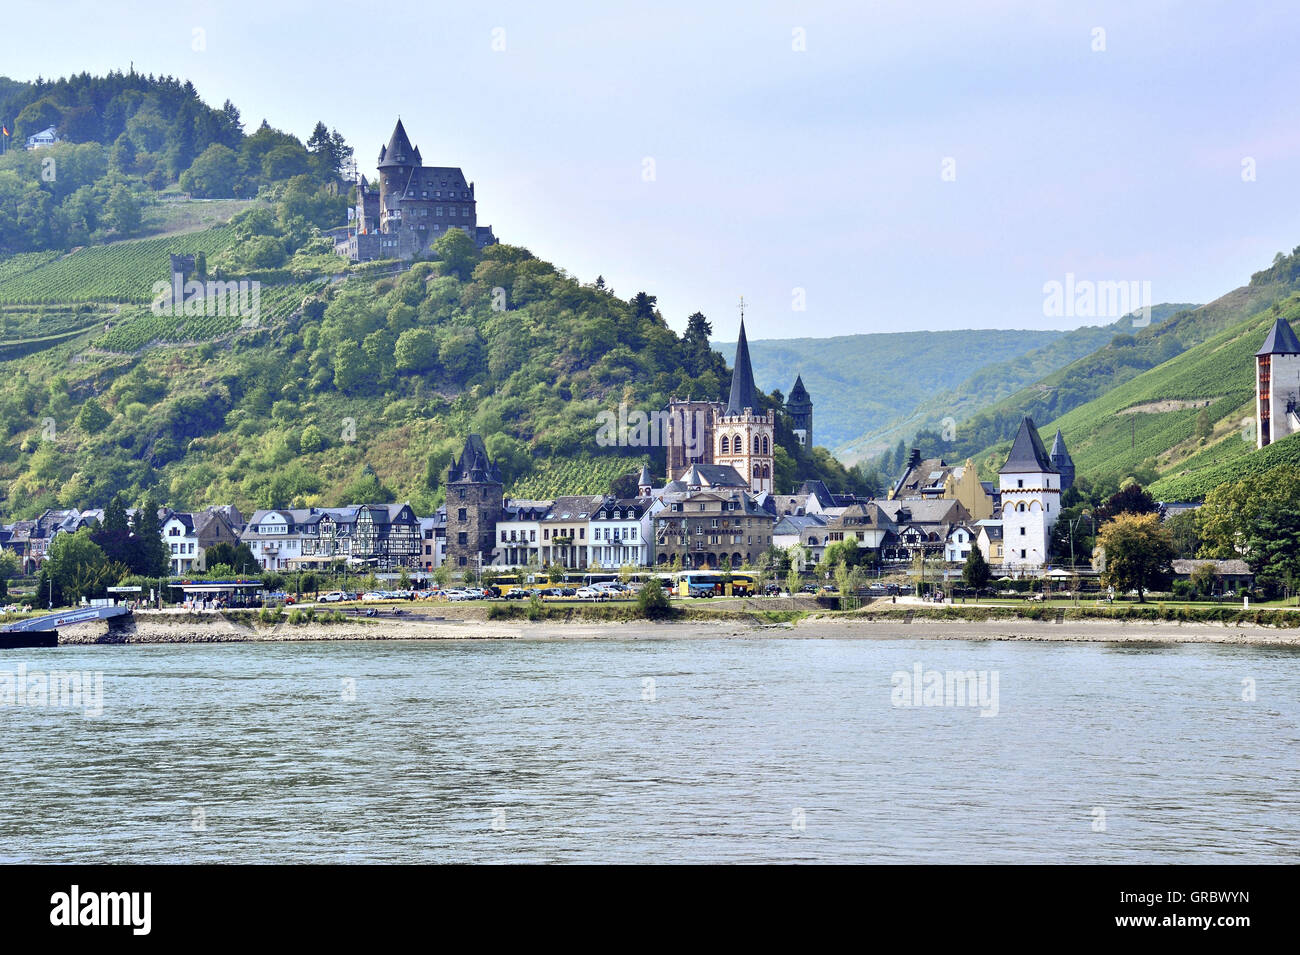 Town Bacharach In The Middle Rhine Valley And Stahleck Castle, Upper Middle Rhine Valley, Germany Stock Photo